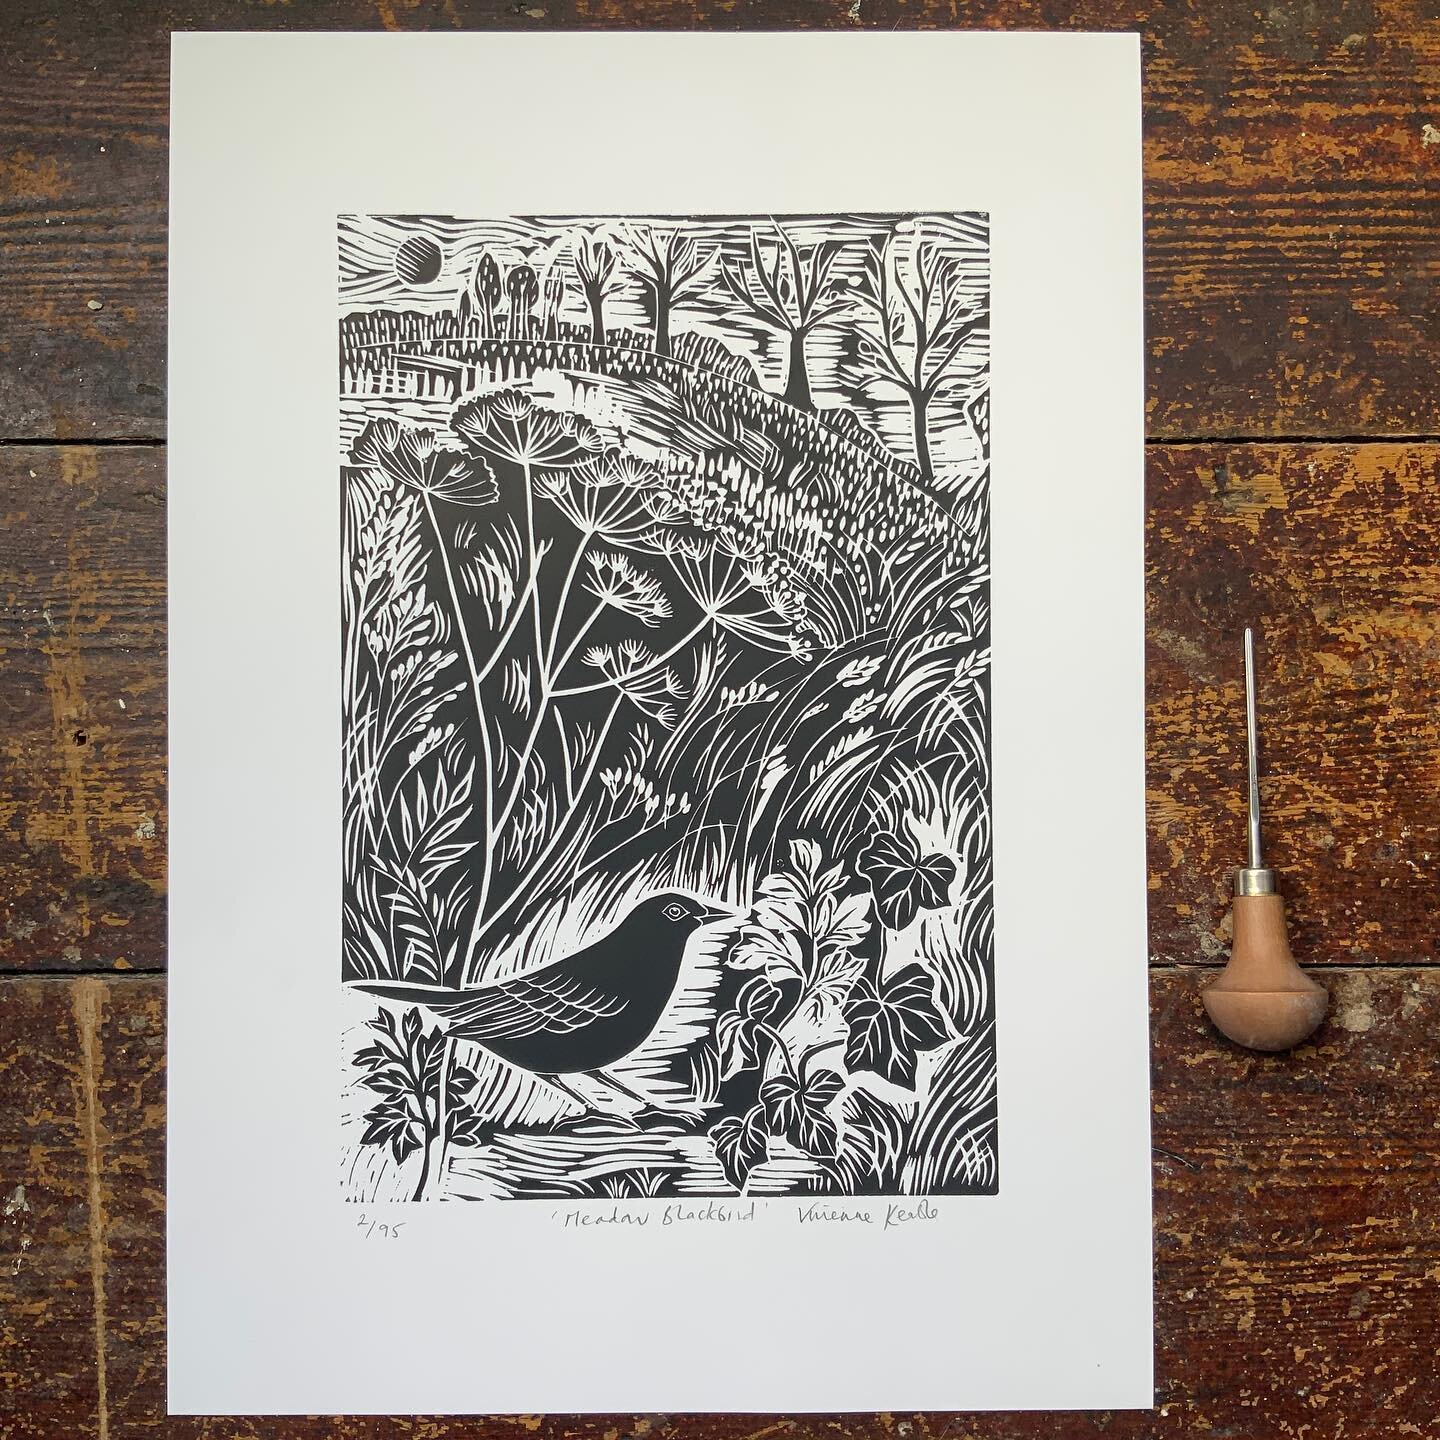 &lsquo;Meadow Blackbird&rsquo; 

This print is now on the website! I had not listed it so you can now buy the original print! 

It&rsquo;s A3 paper and the print size is 20cm x 30cm. 

I was inspired by the lovely Warren Farm and my walks in the urba